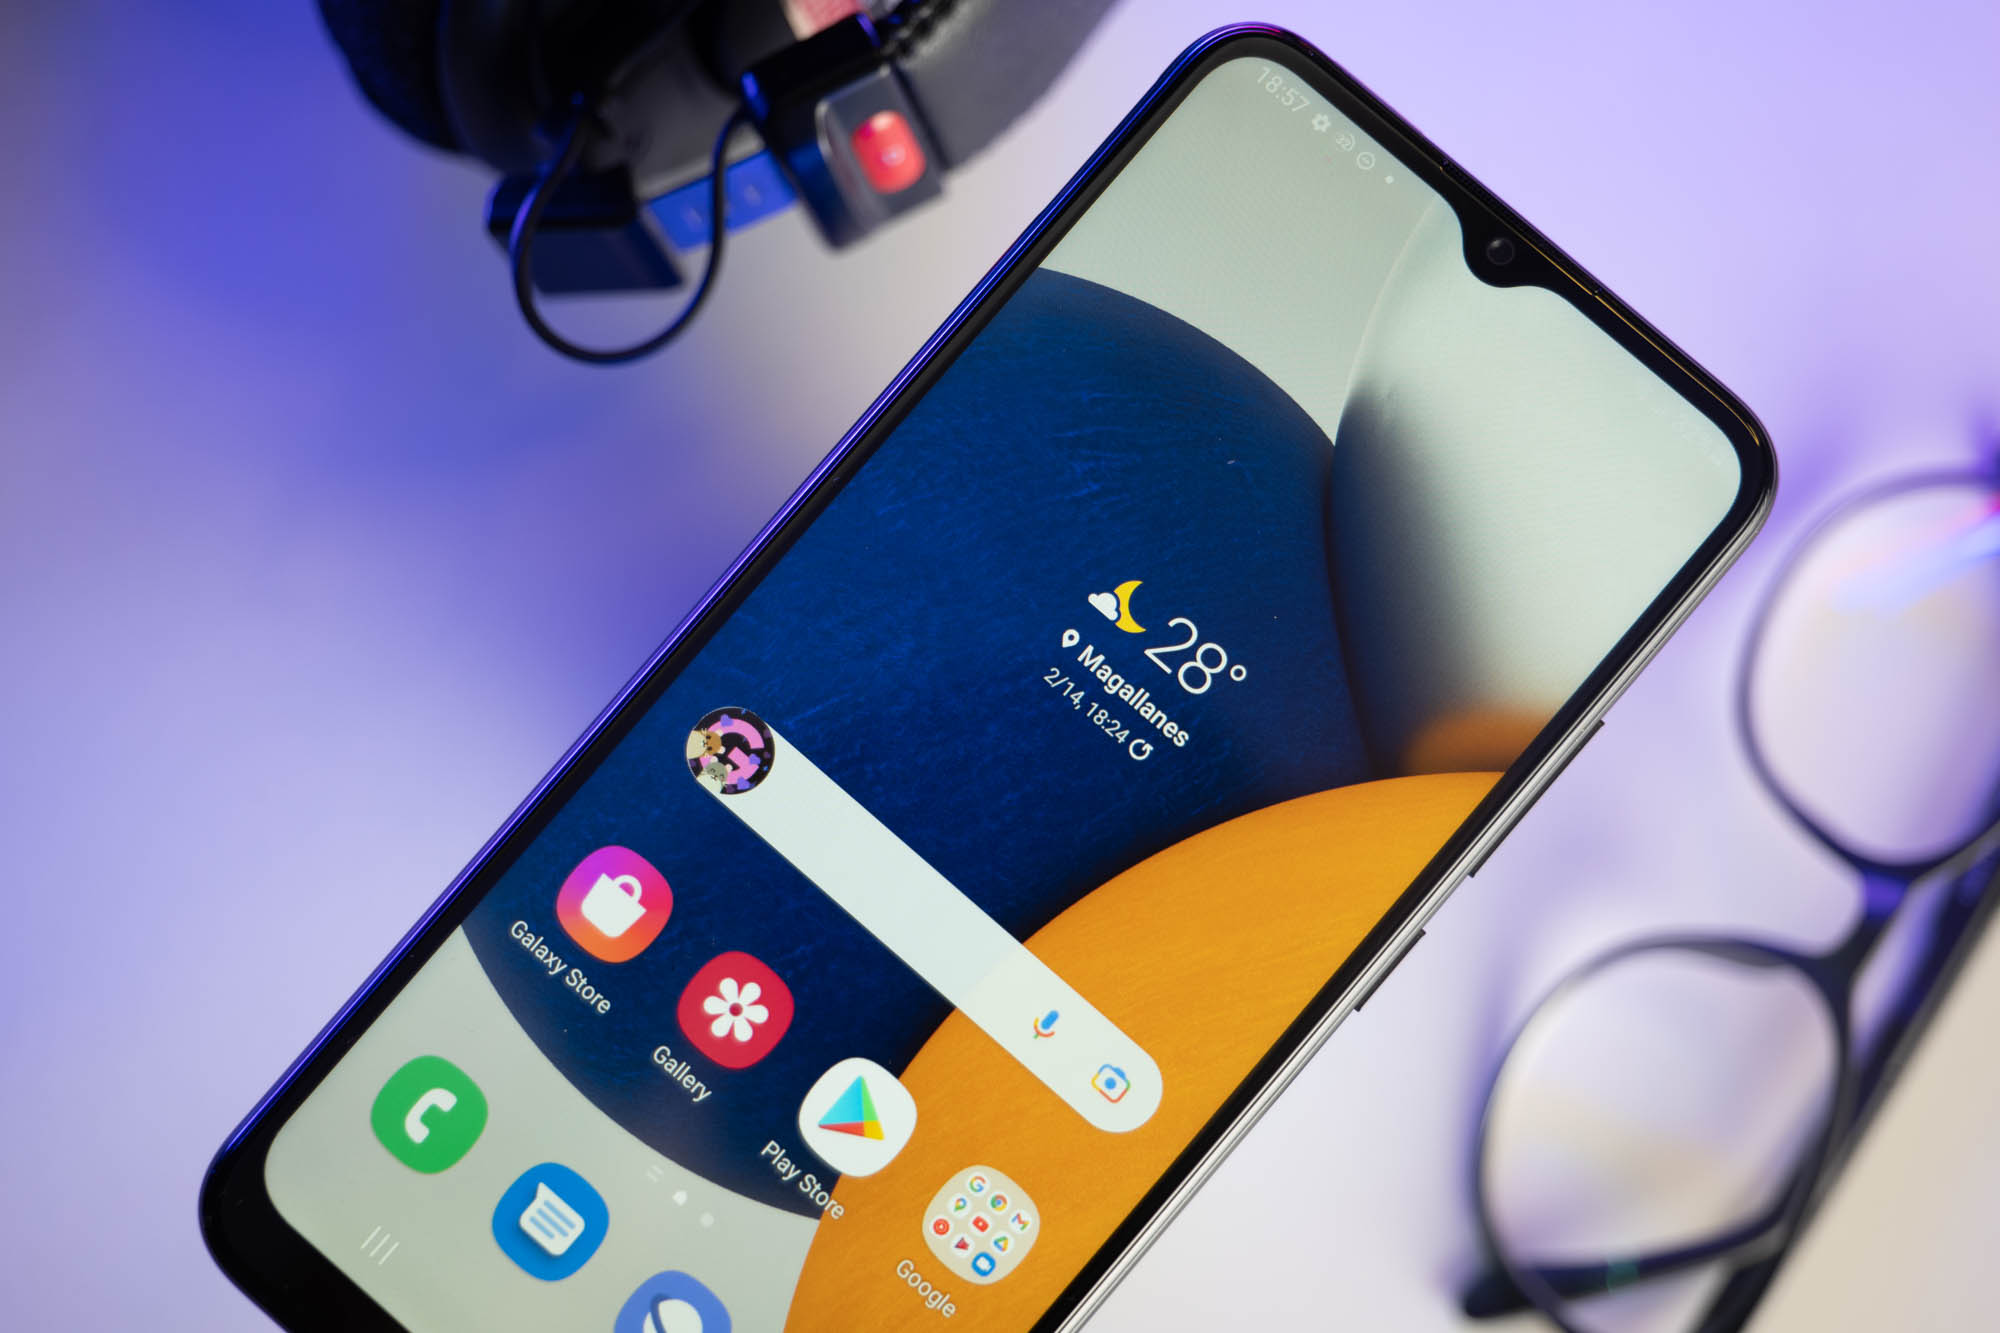 Galaxy A03 review: Underrated and overpowered